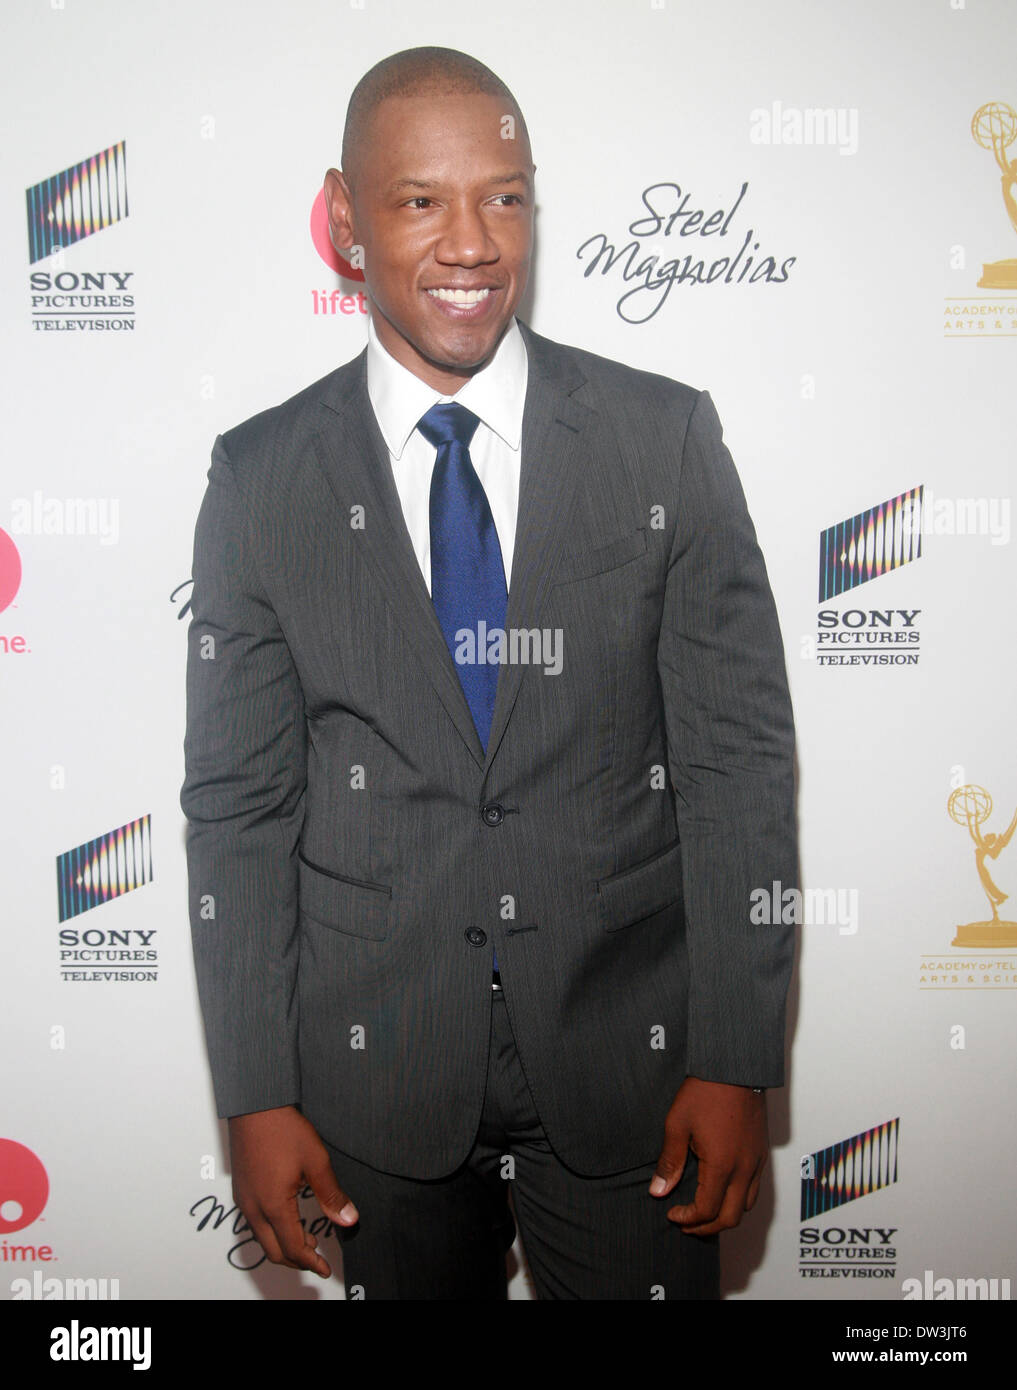 Tory Kittles attends the world premiere of the Lifetime Original Movie Event, Steel Magnolias held at the Paris Theater Featuring: Tory Kittles Where: New York, United States When: 03 Oct 2012 Stock Photo